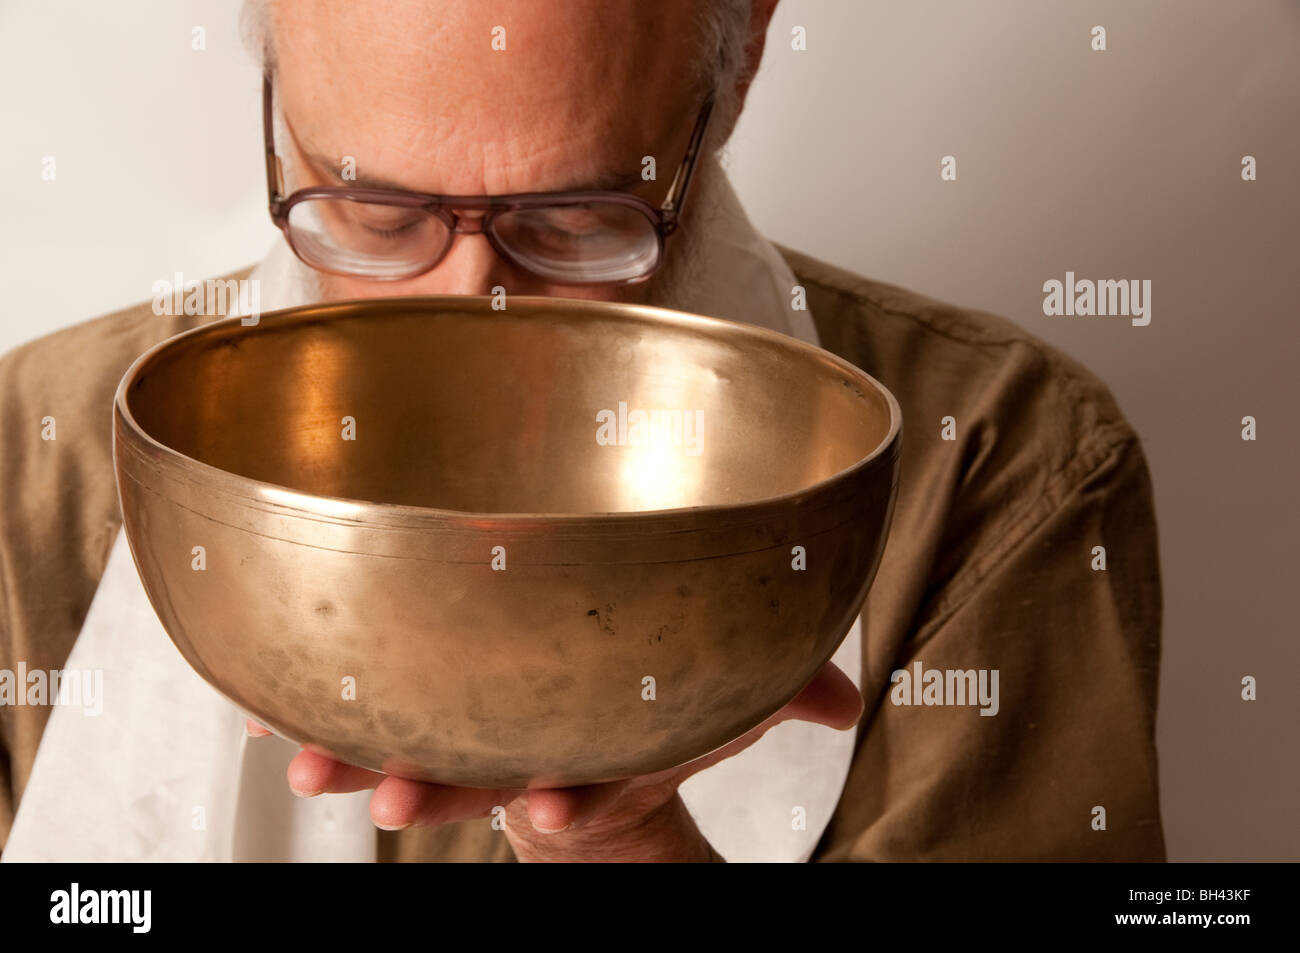 Sacred sound healing practitioner on white background with head bowed wearing glasses holding up Tibetan singing bowl Stock Photo